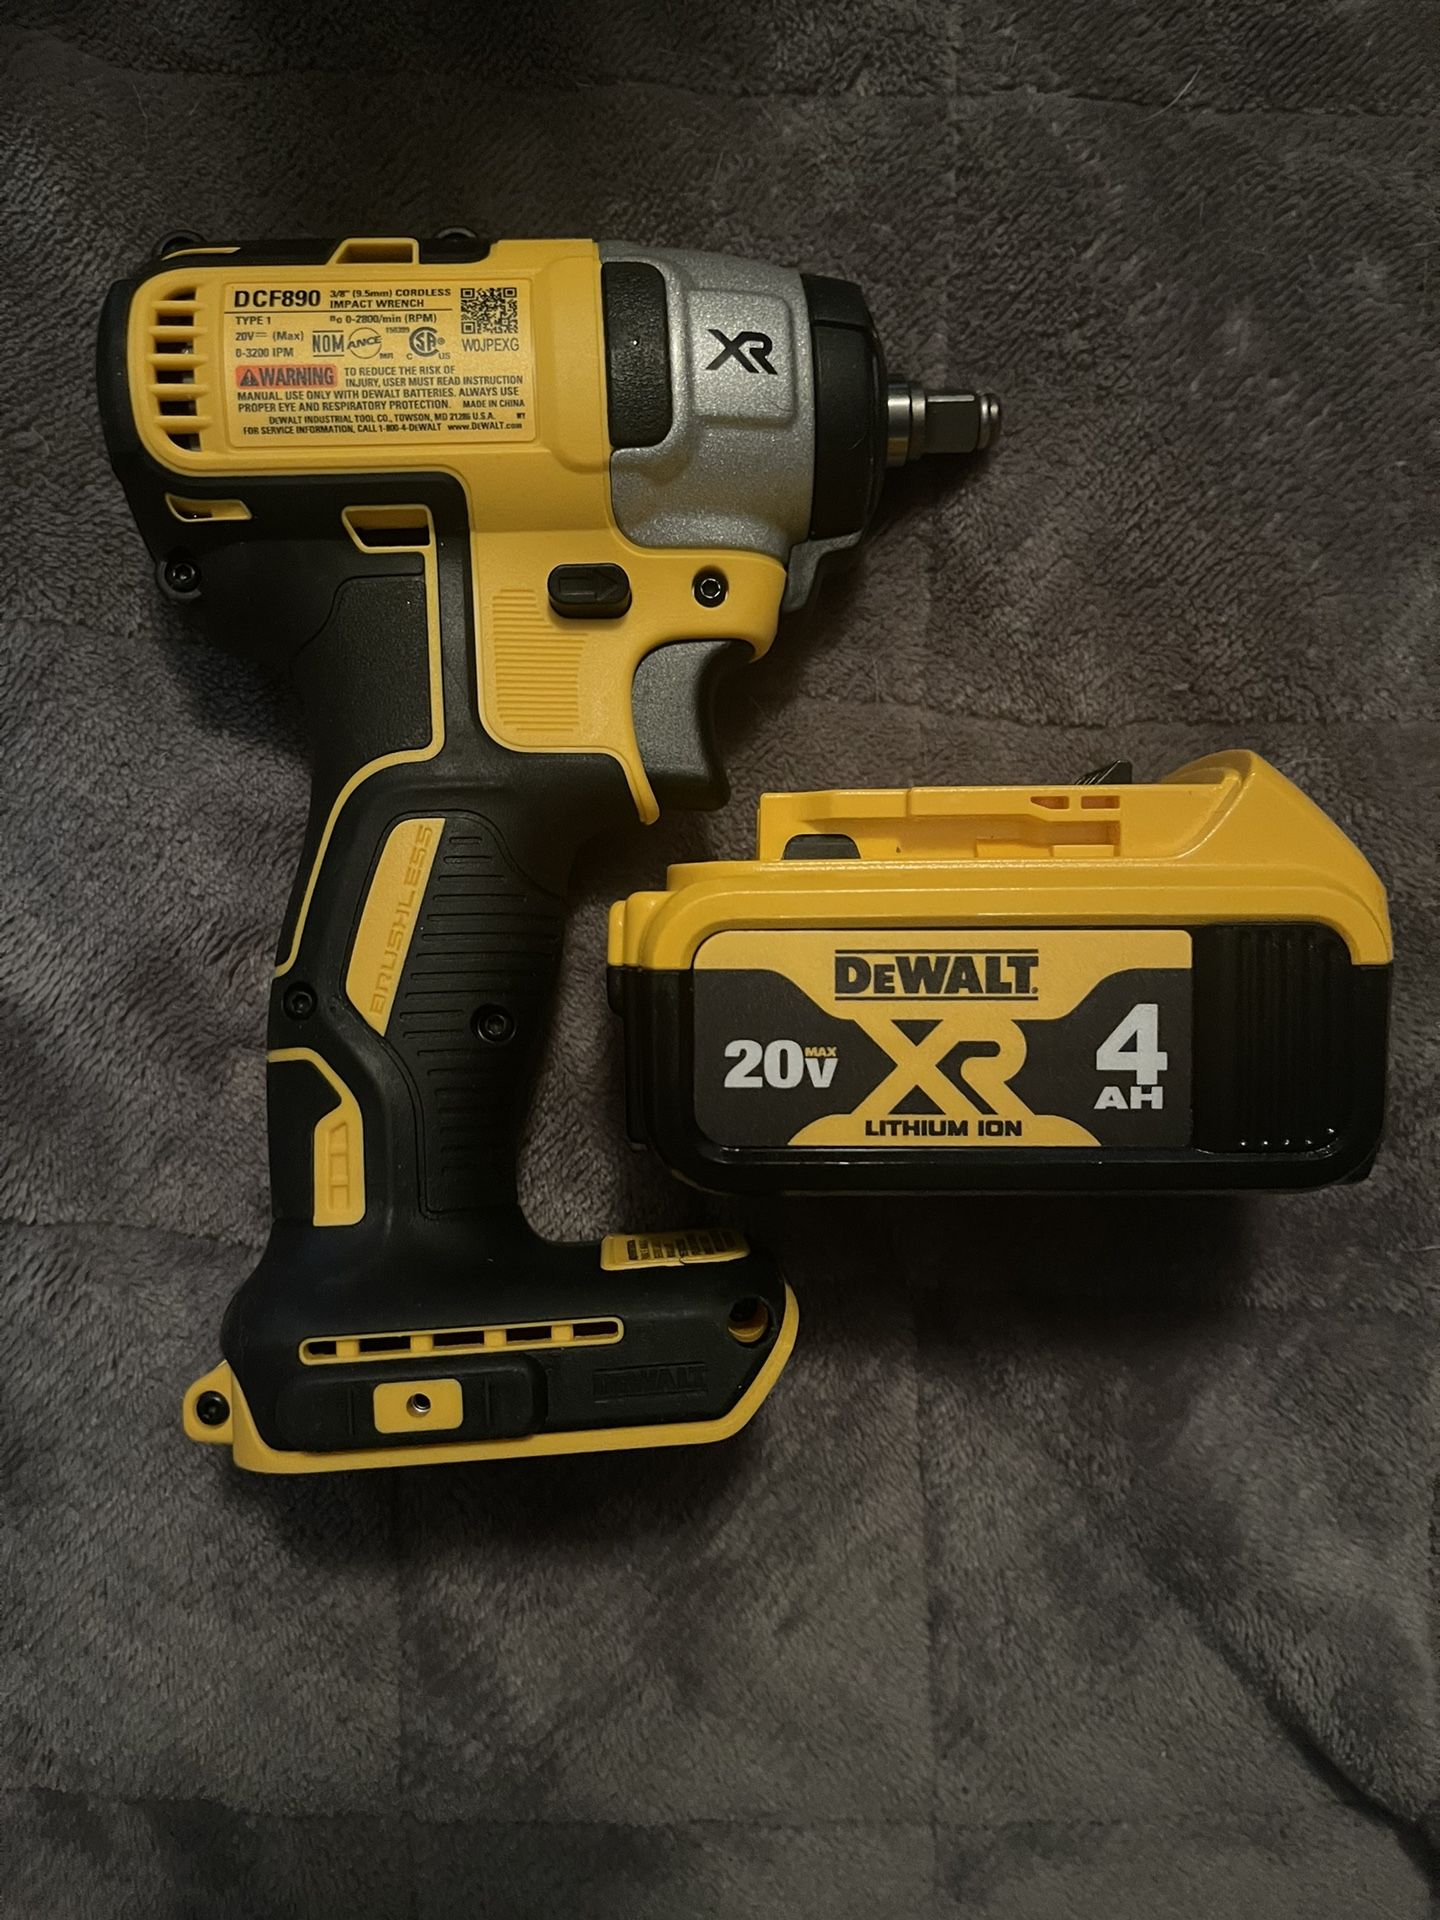 Dcf890 3/8 Dewalt 20 Volt Impact Wrench With New Battery Or Bare Tool 